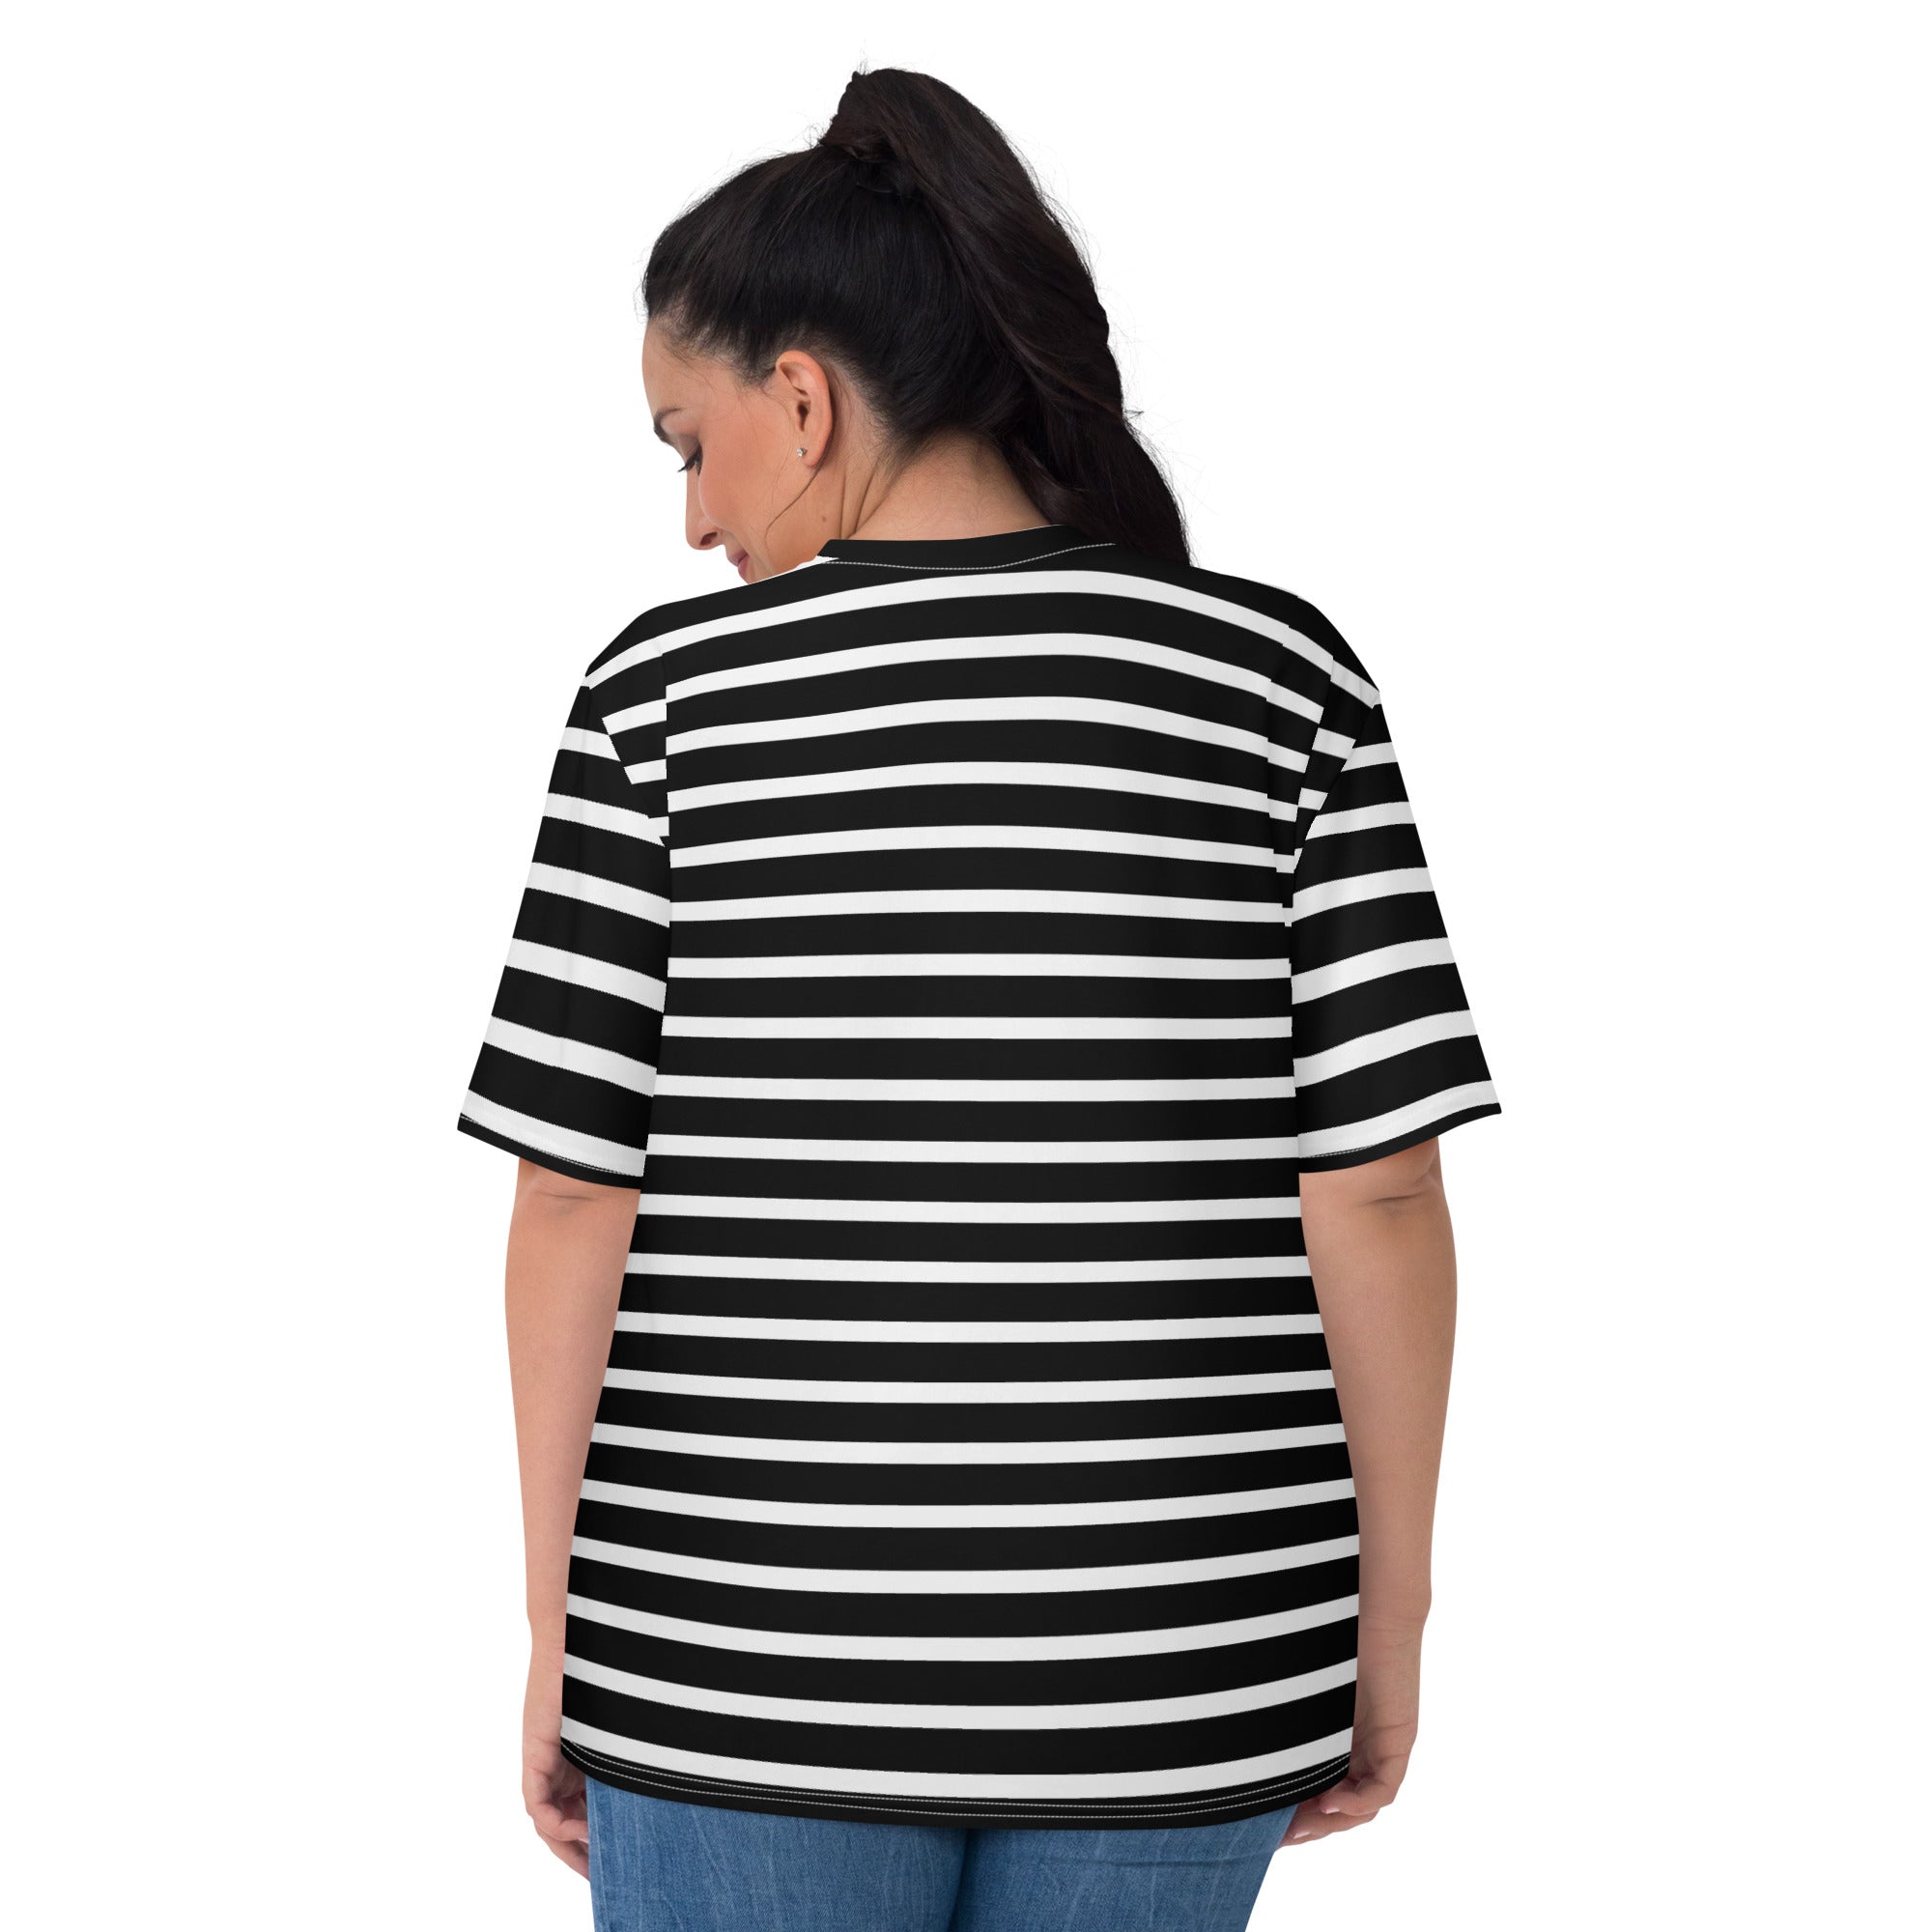 Women's T-shirt- White and Black Striped